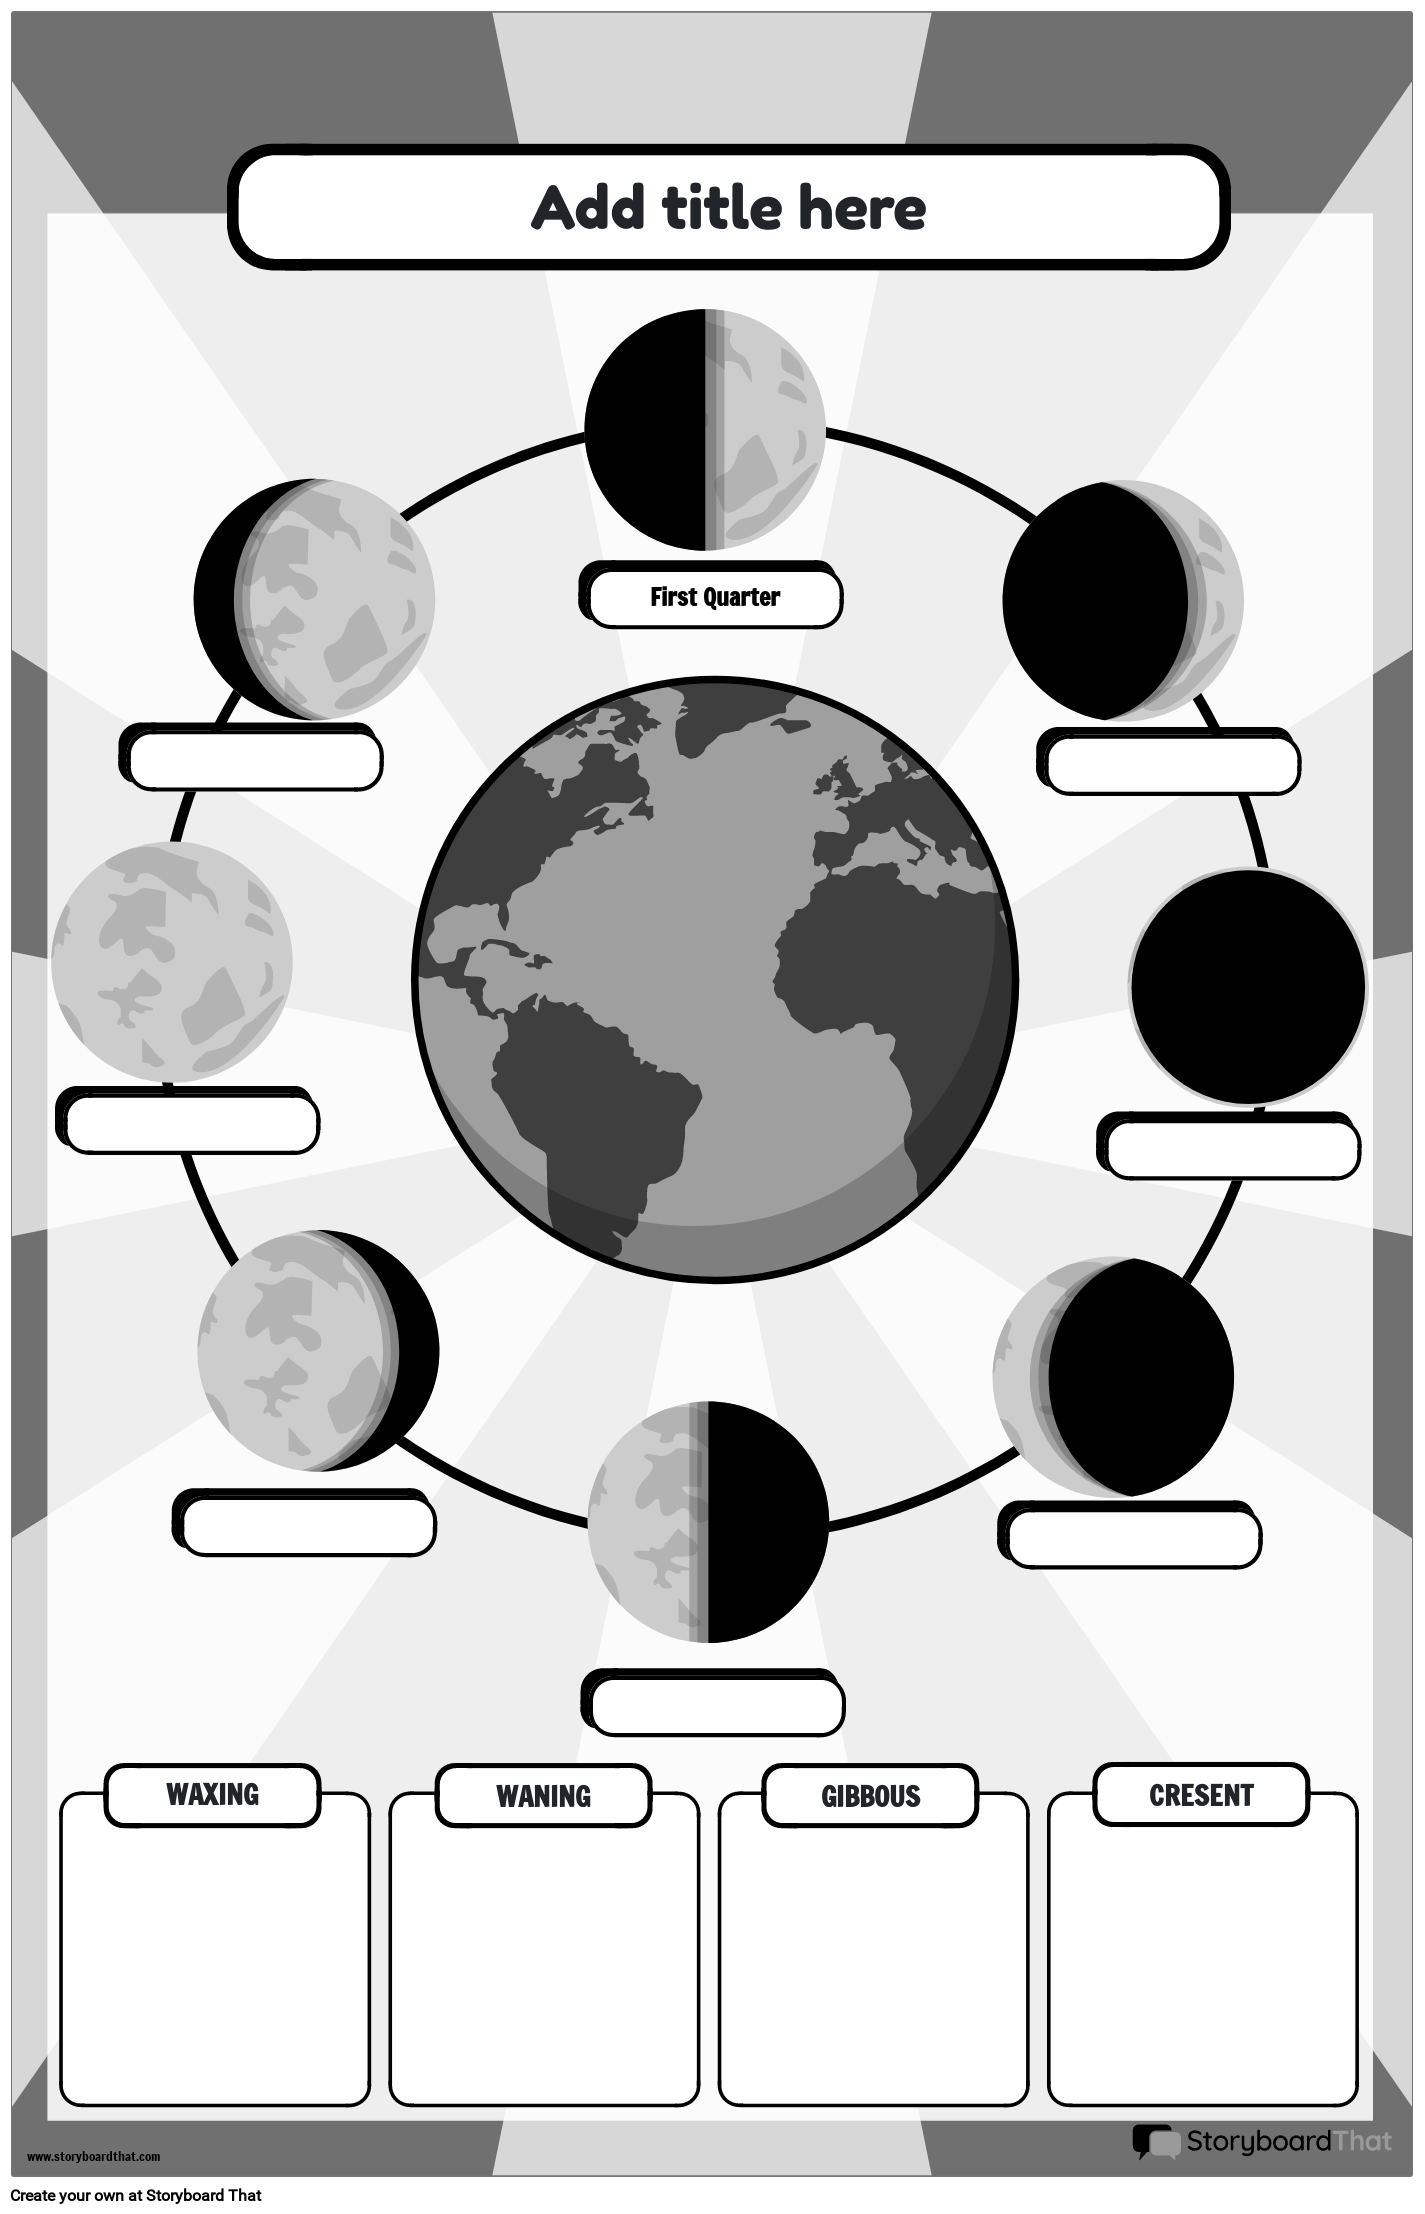 Moon Phase Cycle Poster